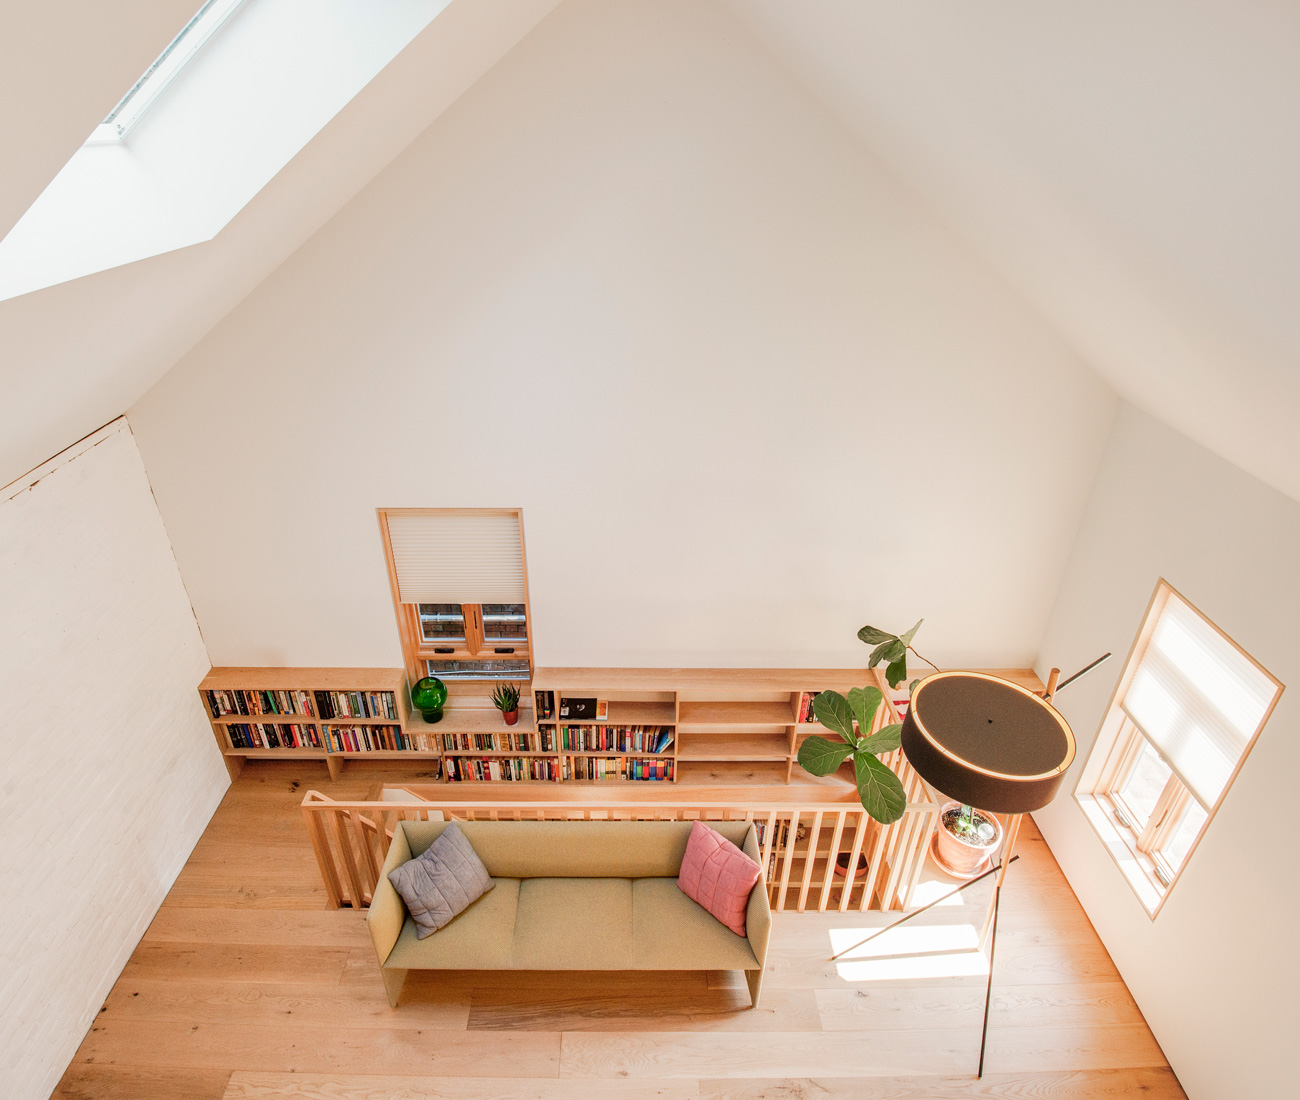 Two bedrooms and a bathroom upstairs are housed in an oak-clad structure. Above will be a lounge accessible by ladder. Sofa from Mjölk; lamp from LightForm.